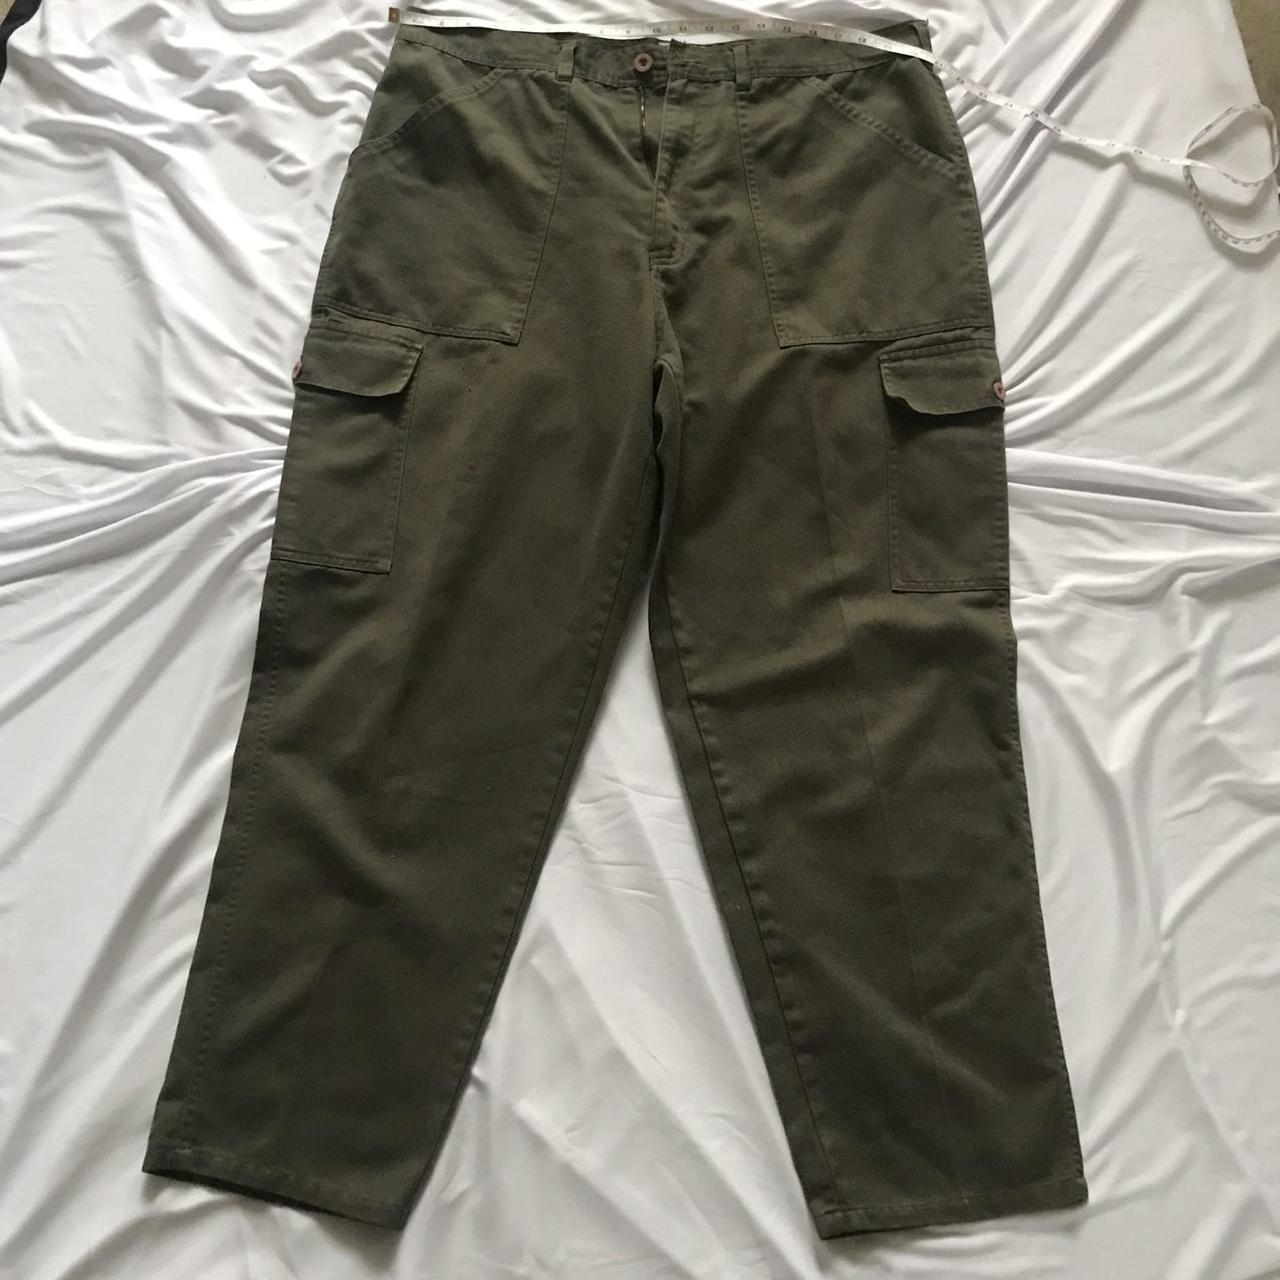 Baggy Cargo Pants perfect fit for new balances and... - Depop